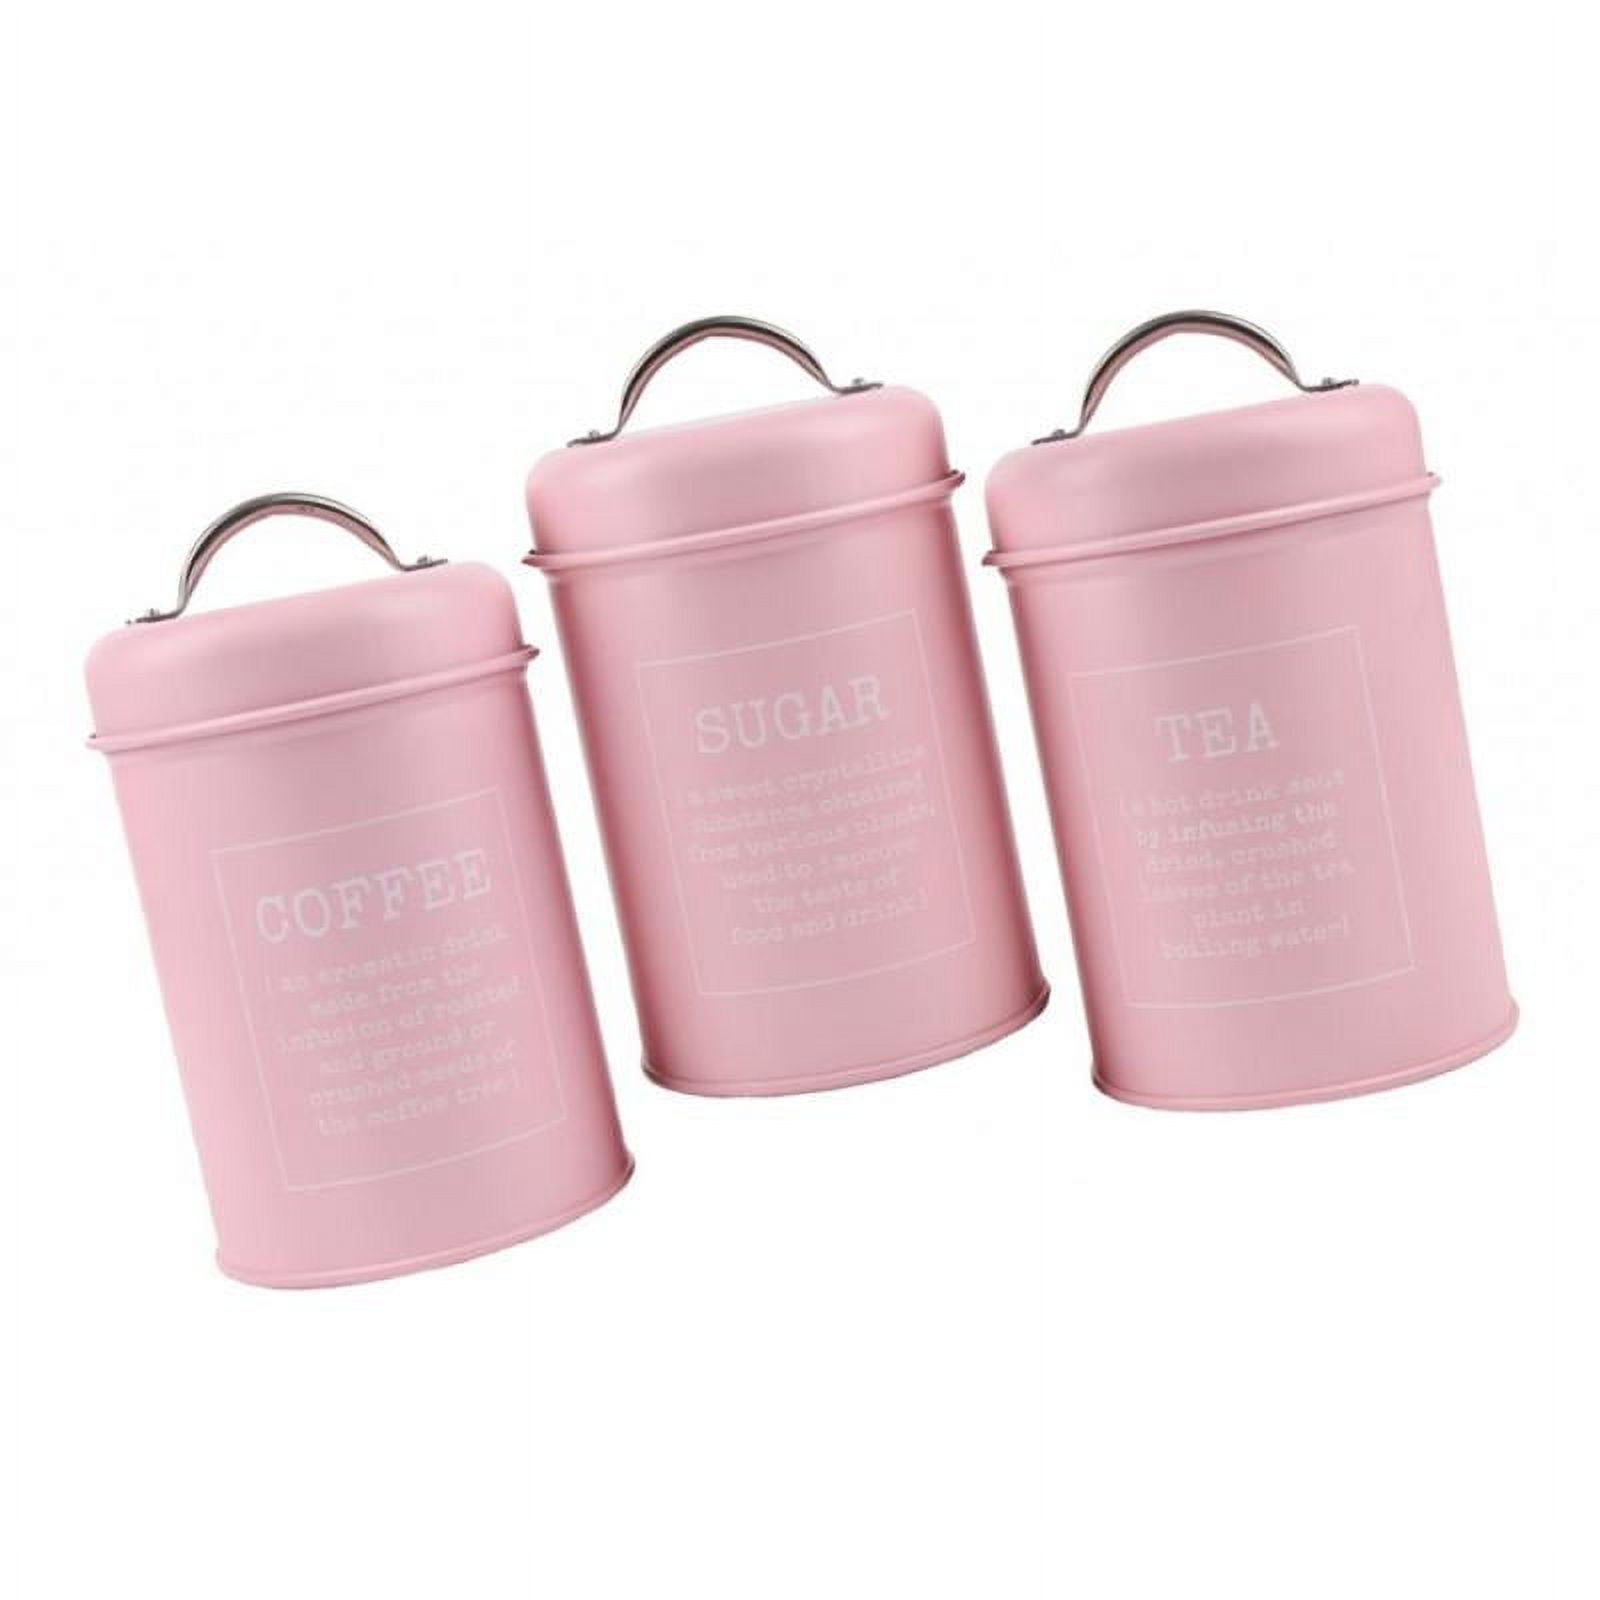 Vintage Super Seal Pale Pink Container Set of 3 Storage Canisters Superseal  Kitchen Storage